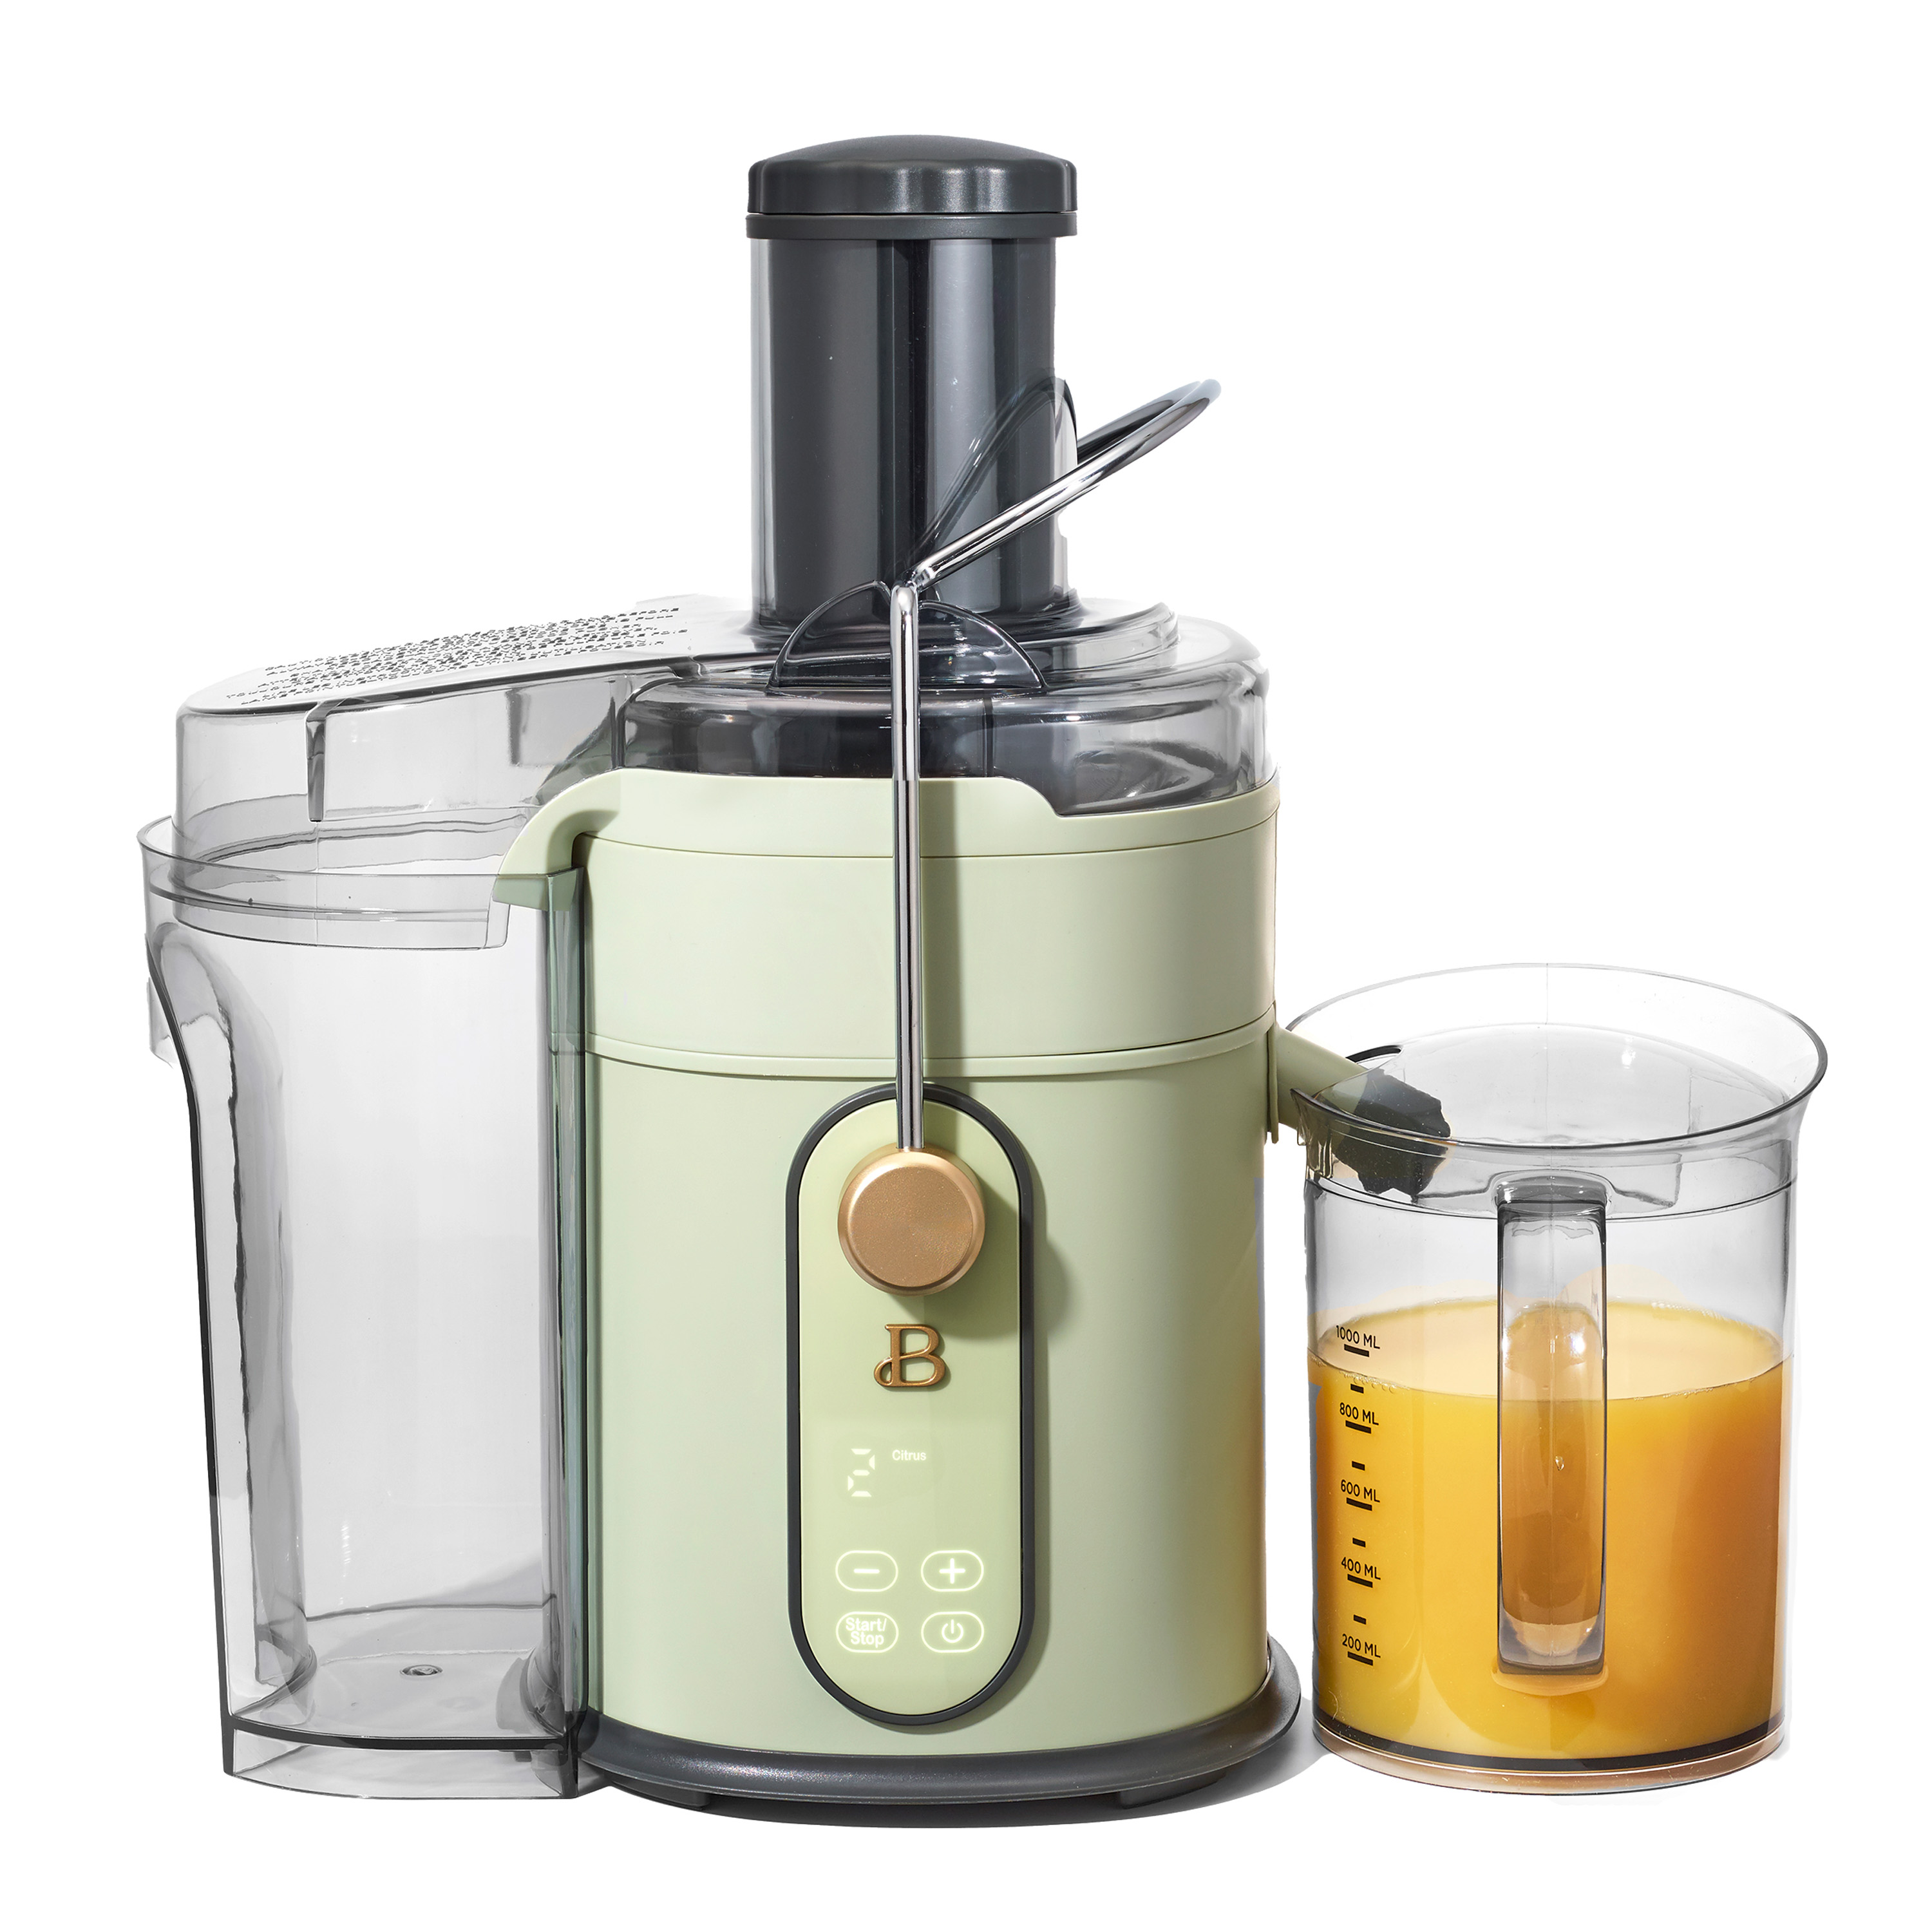 Beautiful 5-Speed 1000W Electric Juice Extractor with Touch Activated Display, Sage Green by Drew Barrymore - image 1 of 11